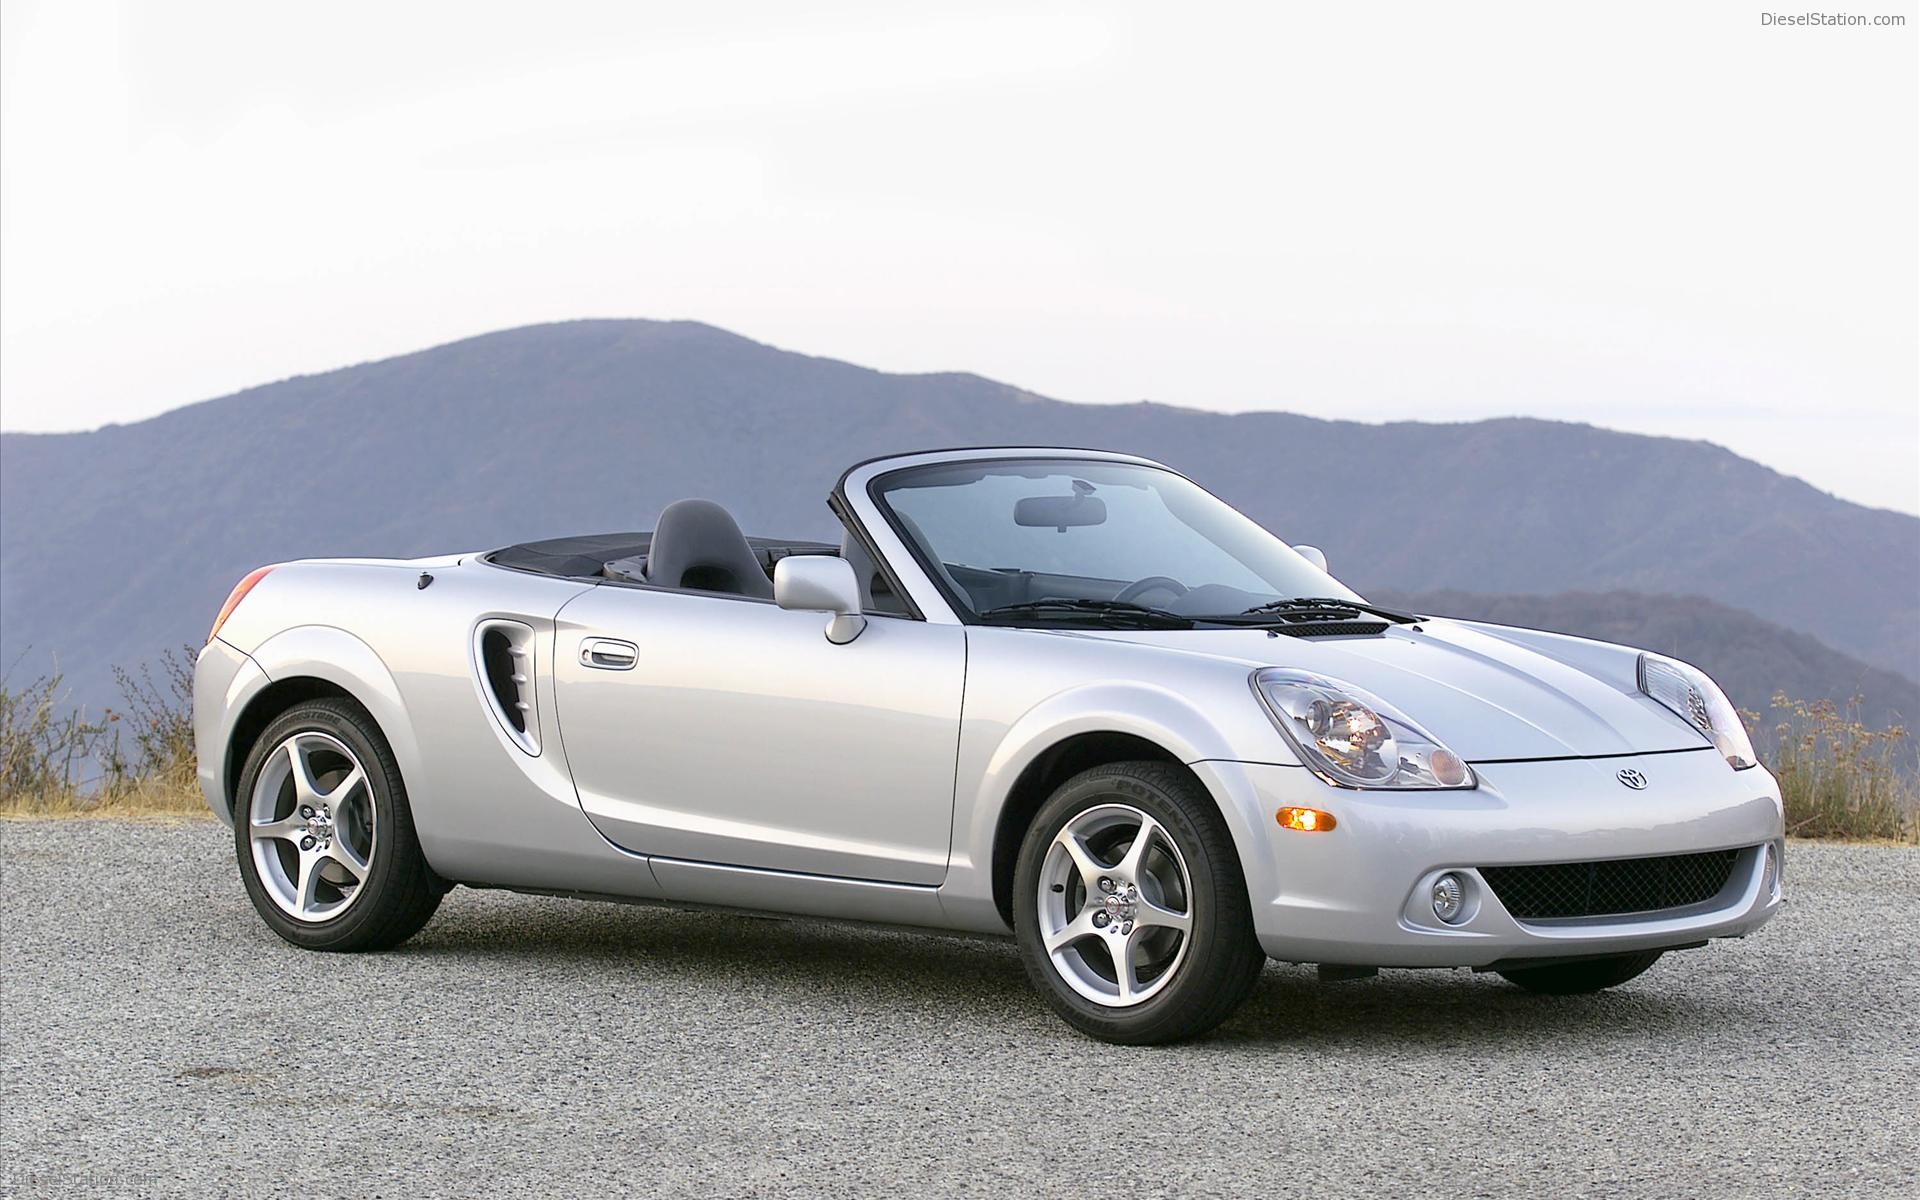 Toyota Mr2 Spyder Widescreen Exotic Car Image Of